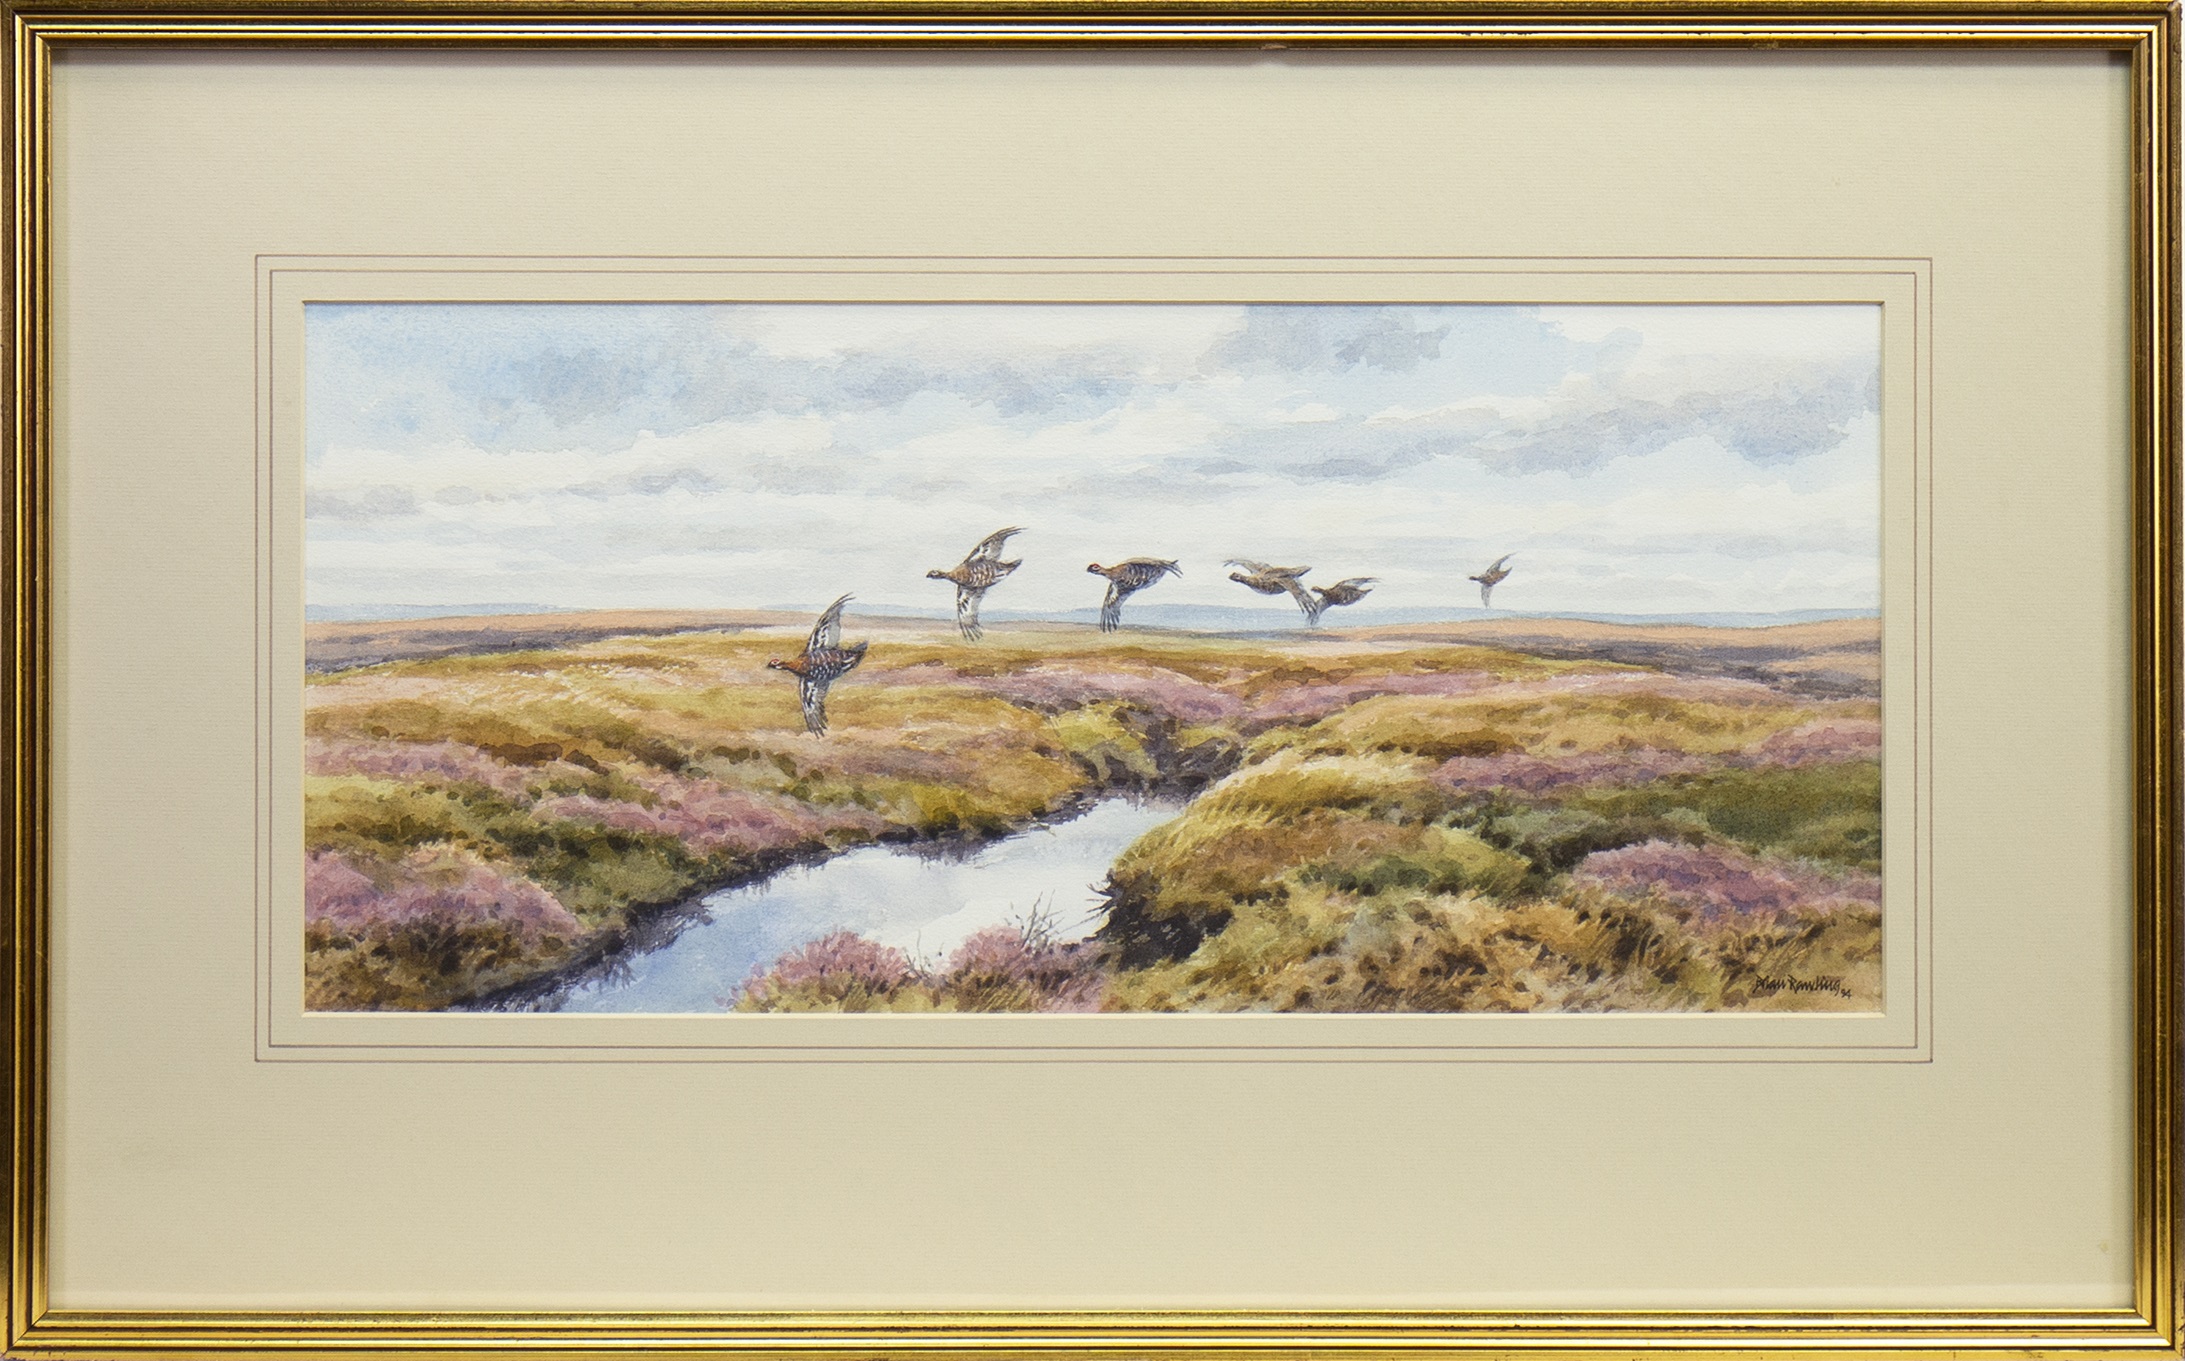 PHEASANTS IN FLIGHT, A WATERCOLOUR BY BRIAN RAWLING - Image 2 of 2